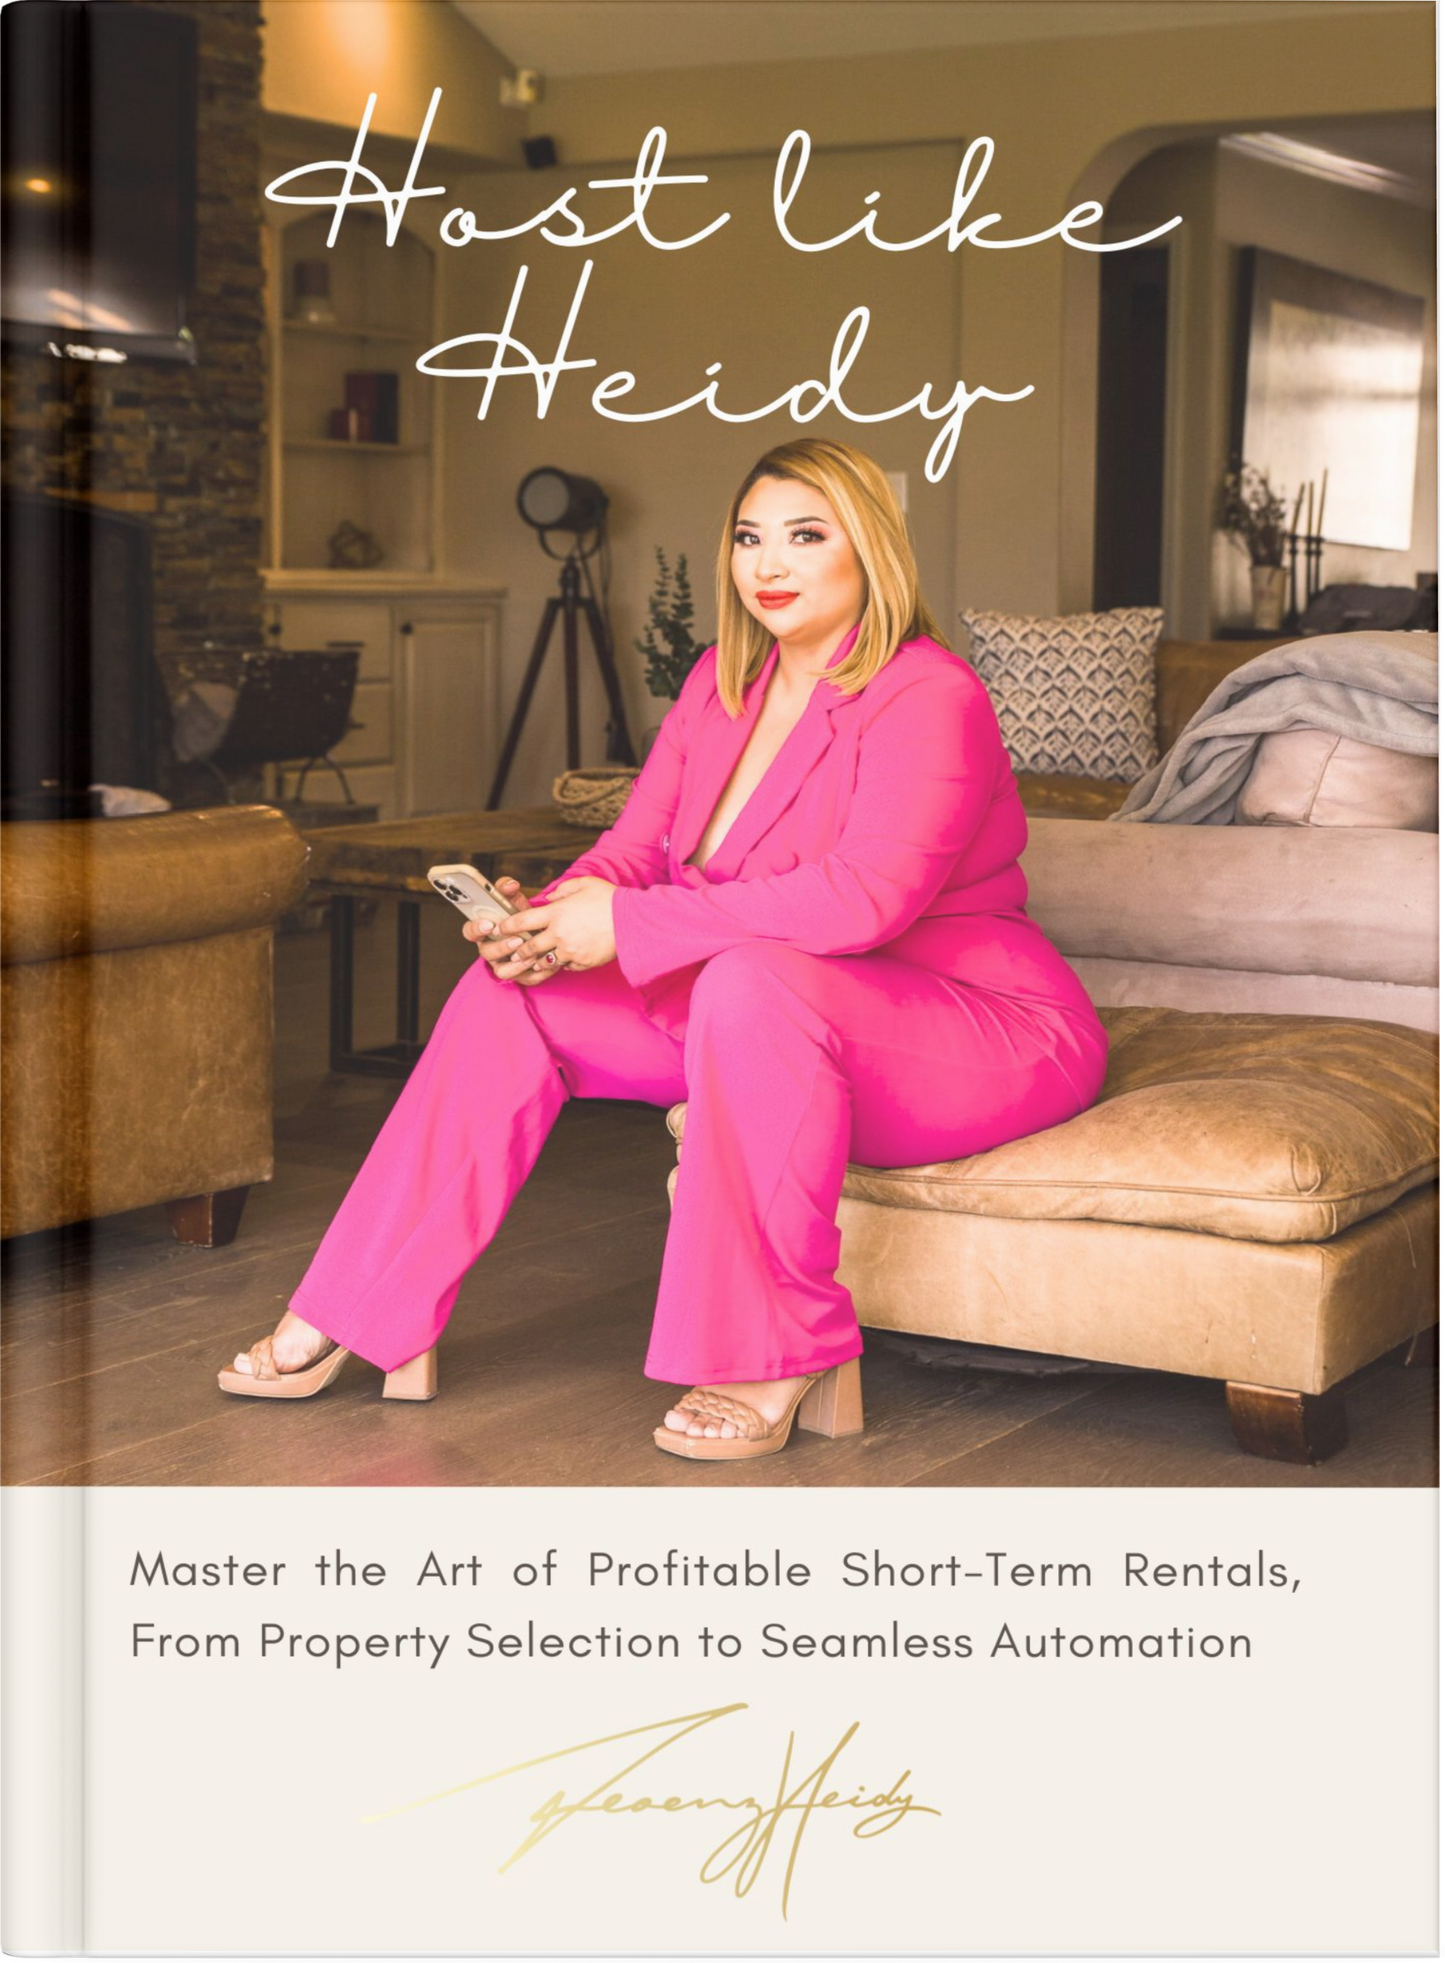 Host Like Heidy. Master the Art of Profitable Short-Term Rentals, From Property Selection to Seamless Automation (eBook)